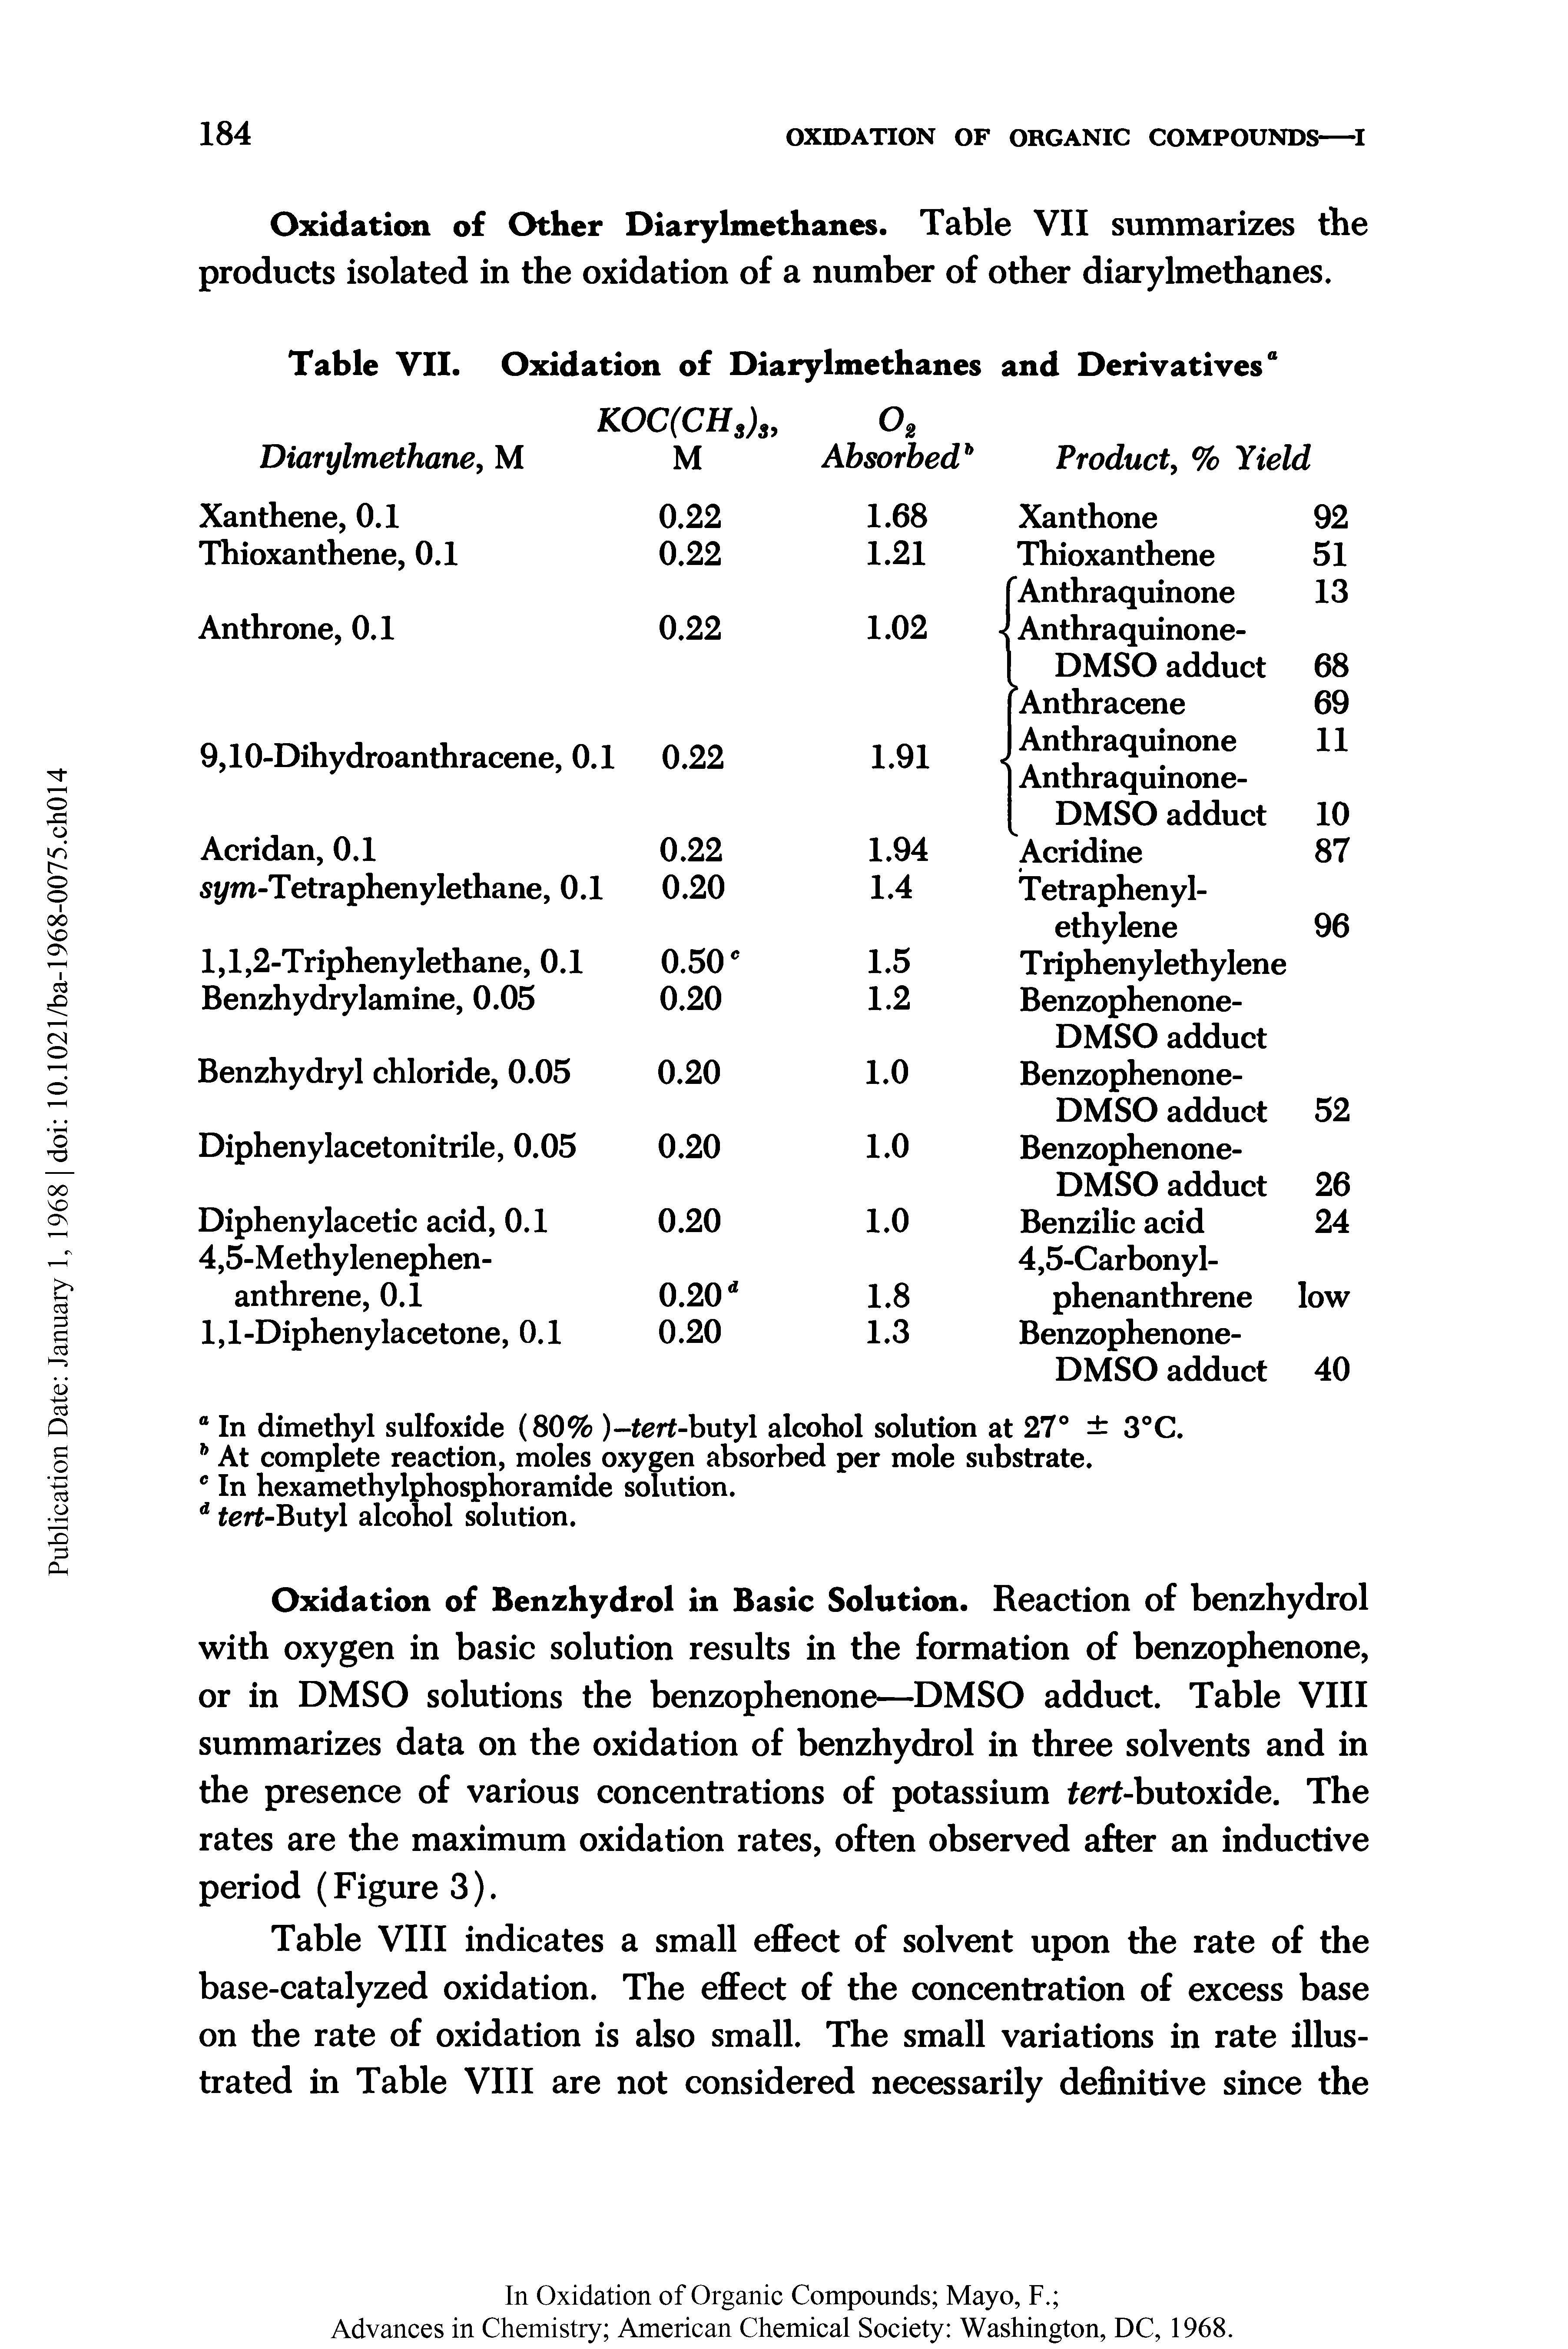 Table VIII indicates a small effect of solvent upon the rate of the base-catalyzed oxidation. The effect of the concentration of excess base on the rate of oxidation is also small. The small variations in rate illustrated in Table VIII are not considered necessarily definitive since the...